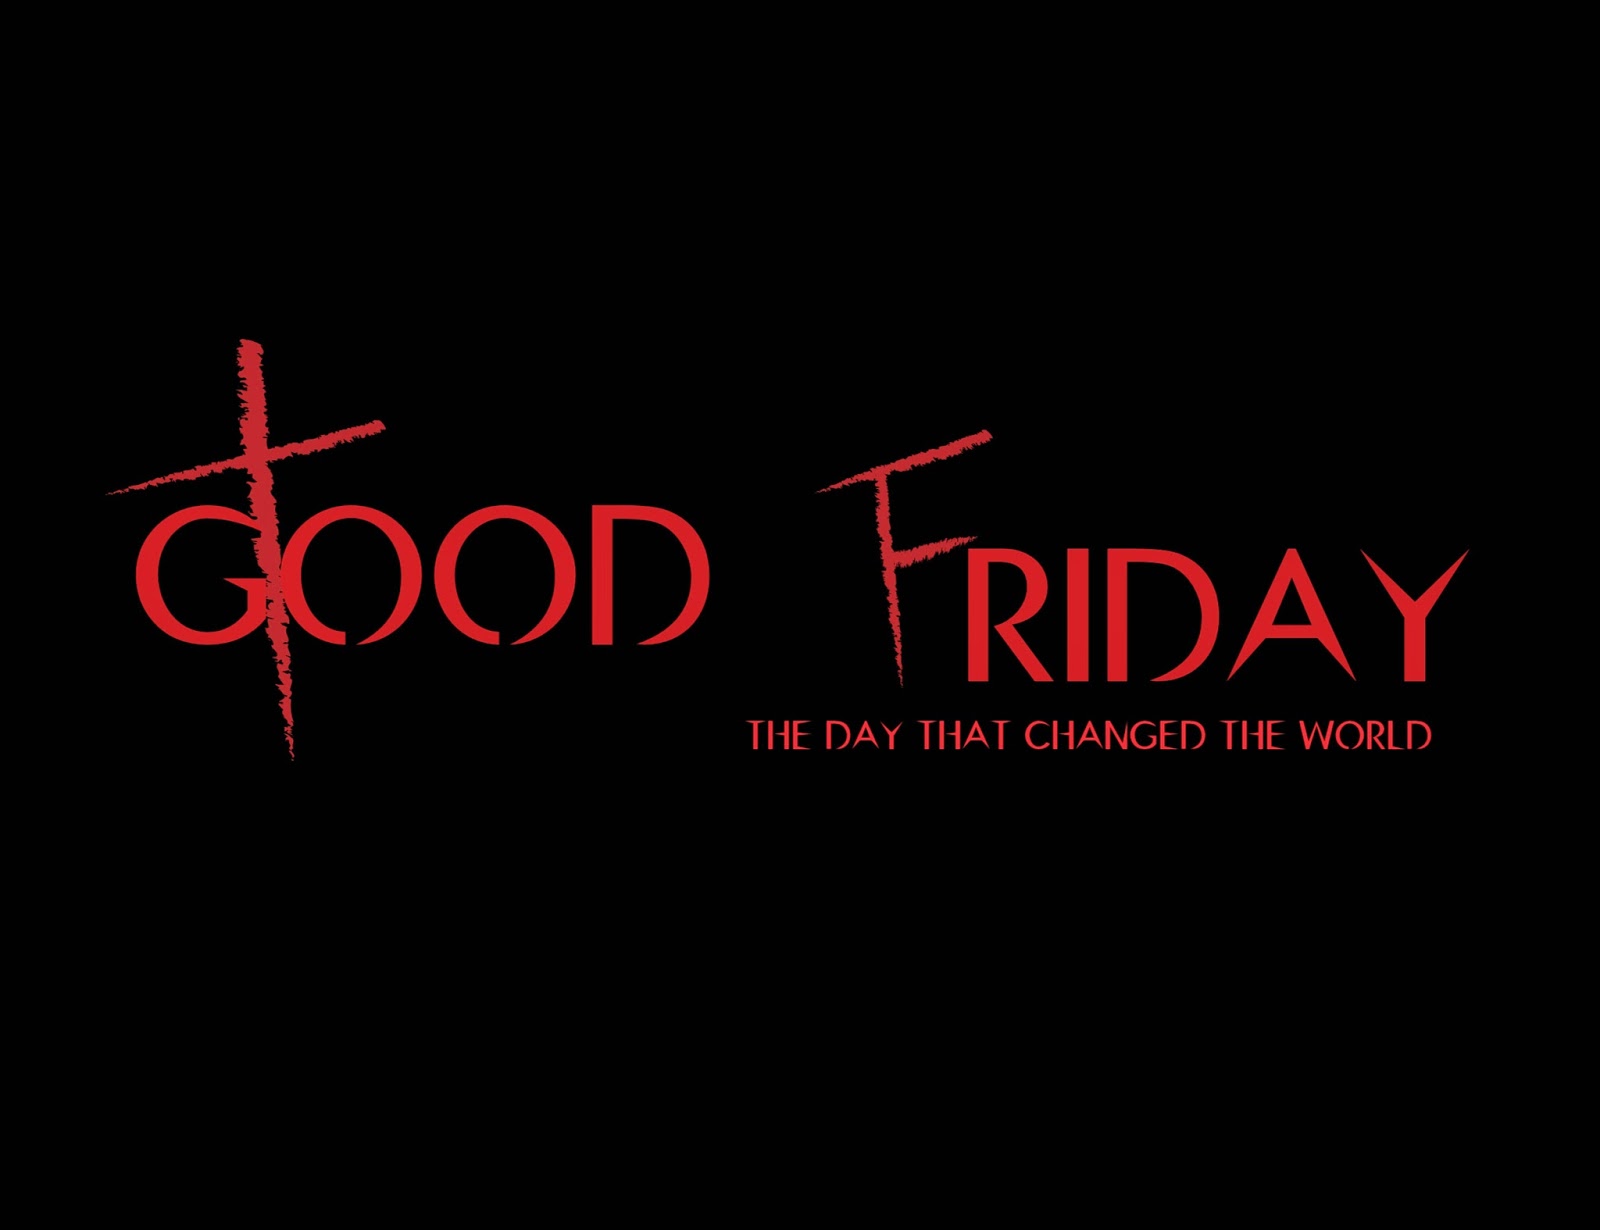 Good Friday Background Wallpaper Image Quotes